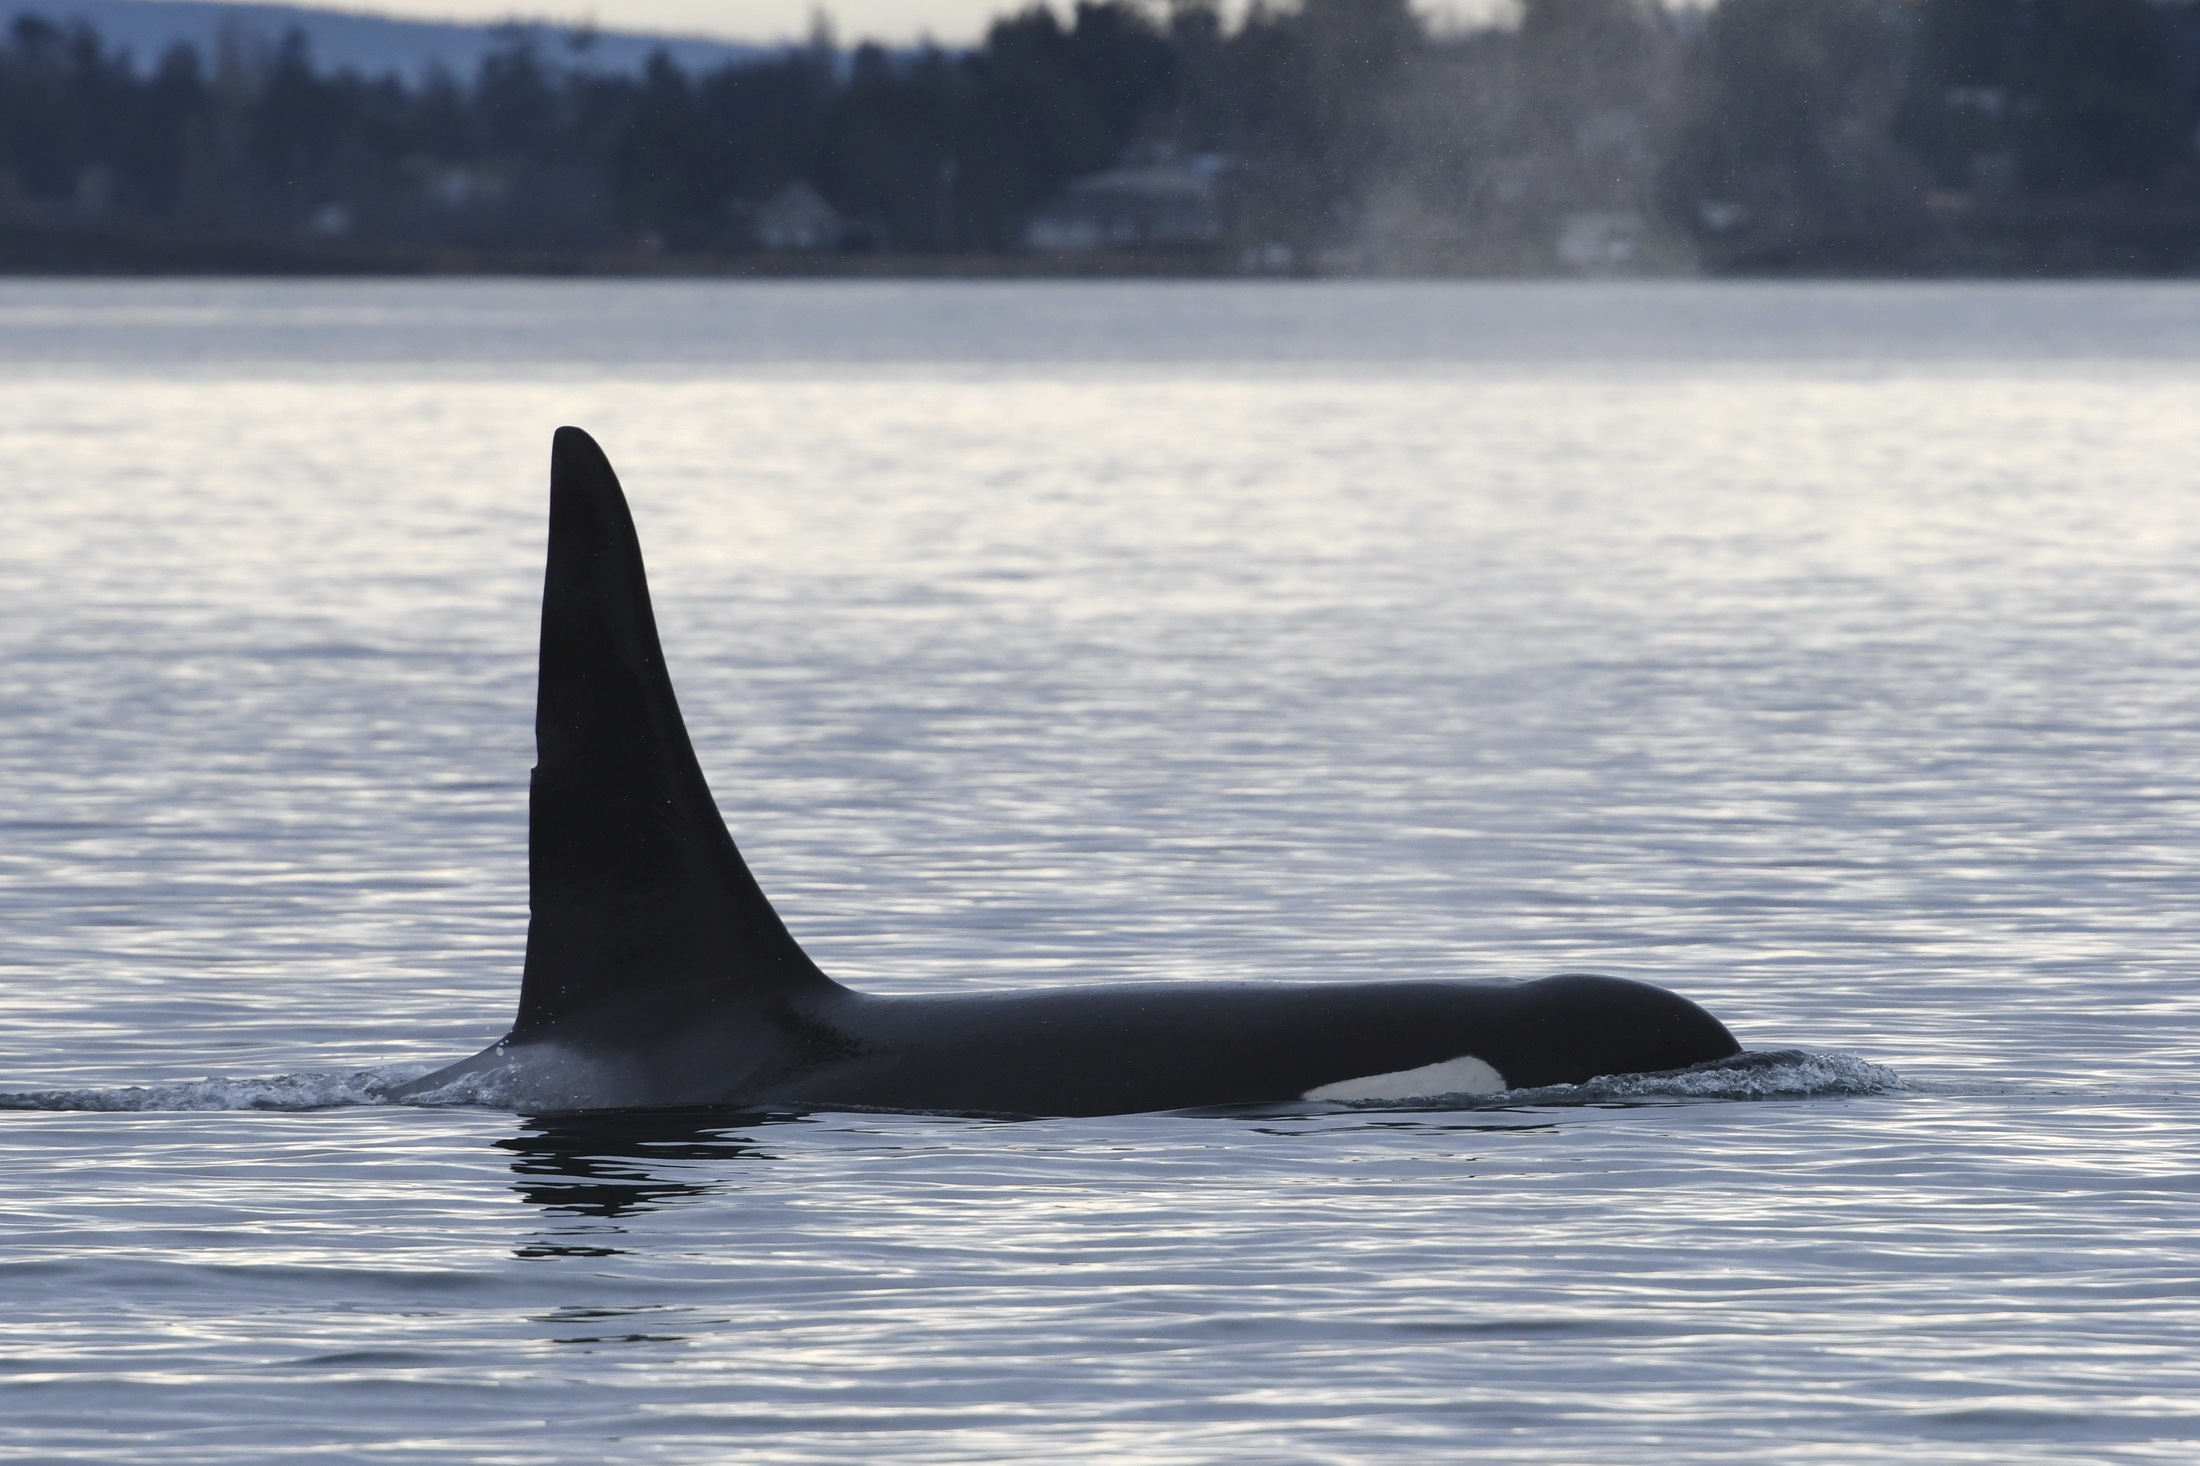 PHOTO: This January 2020 photograph provided by the Center for Whale Research shows a large male orca, known as L41 or Mega, surfacing in the Strait of Juan de Fuca.